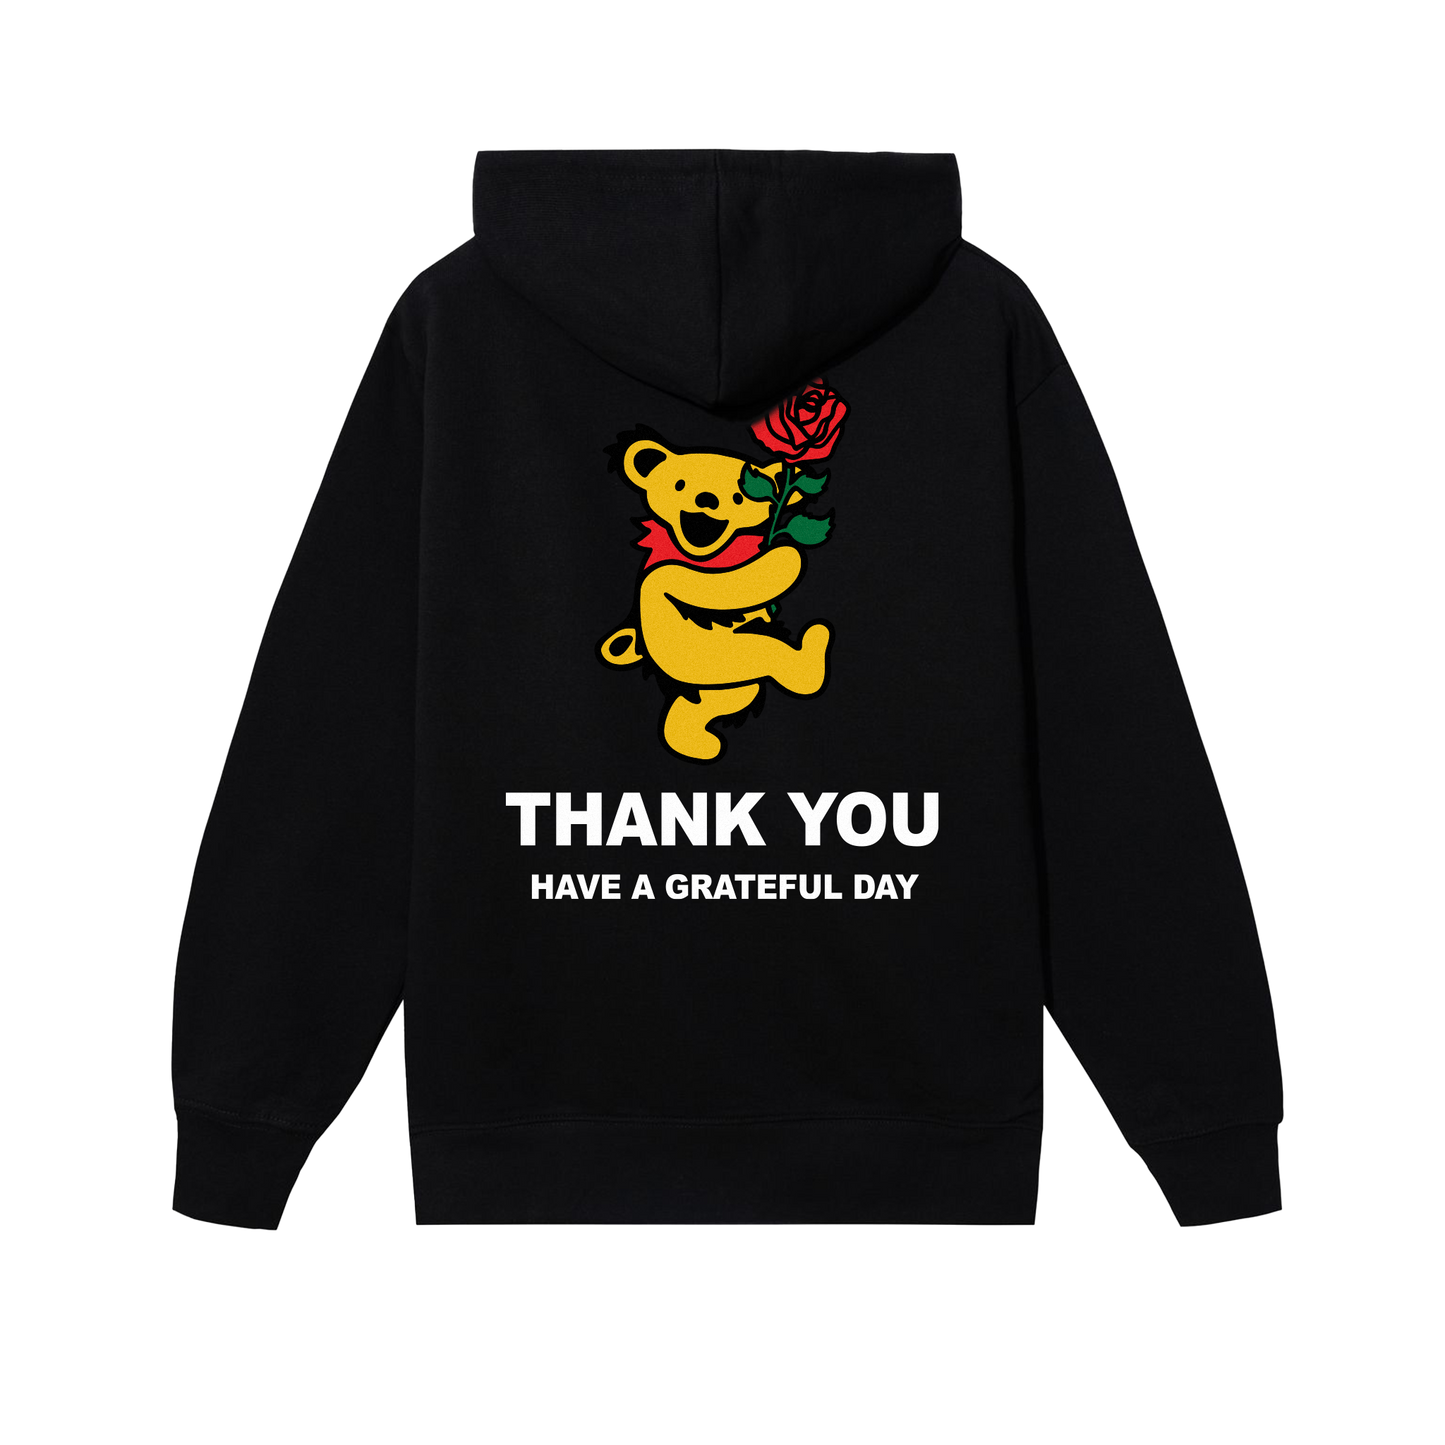 HAVE A GRATEFUL DAY HOODIE